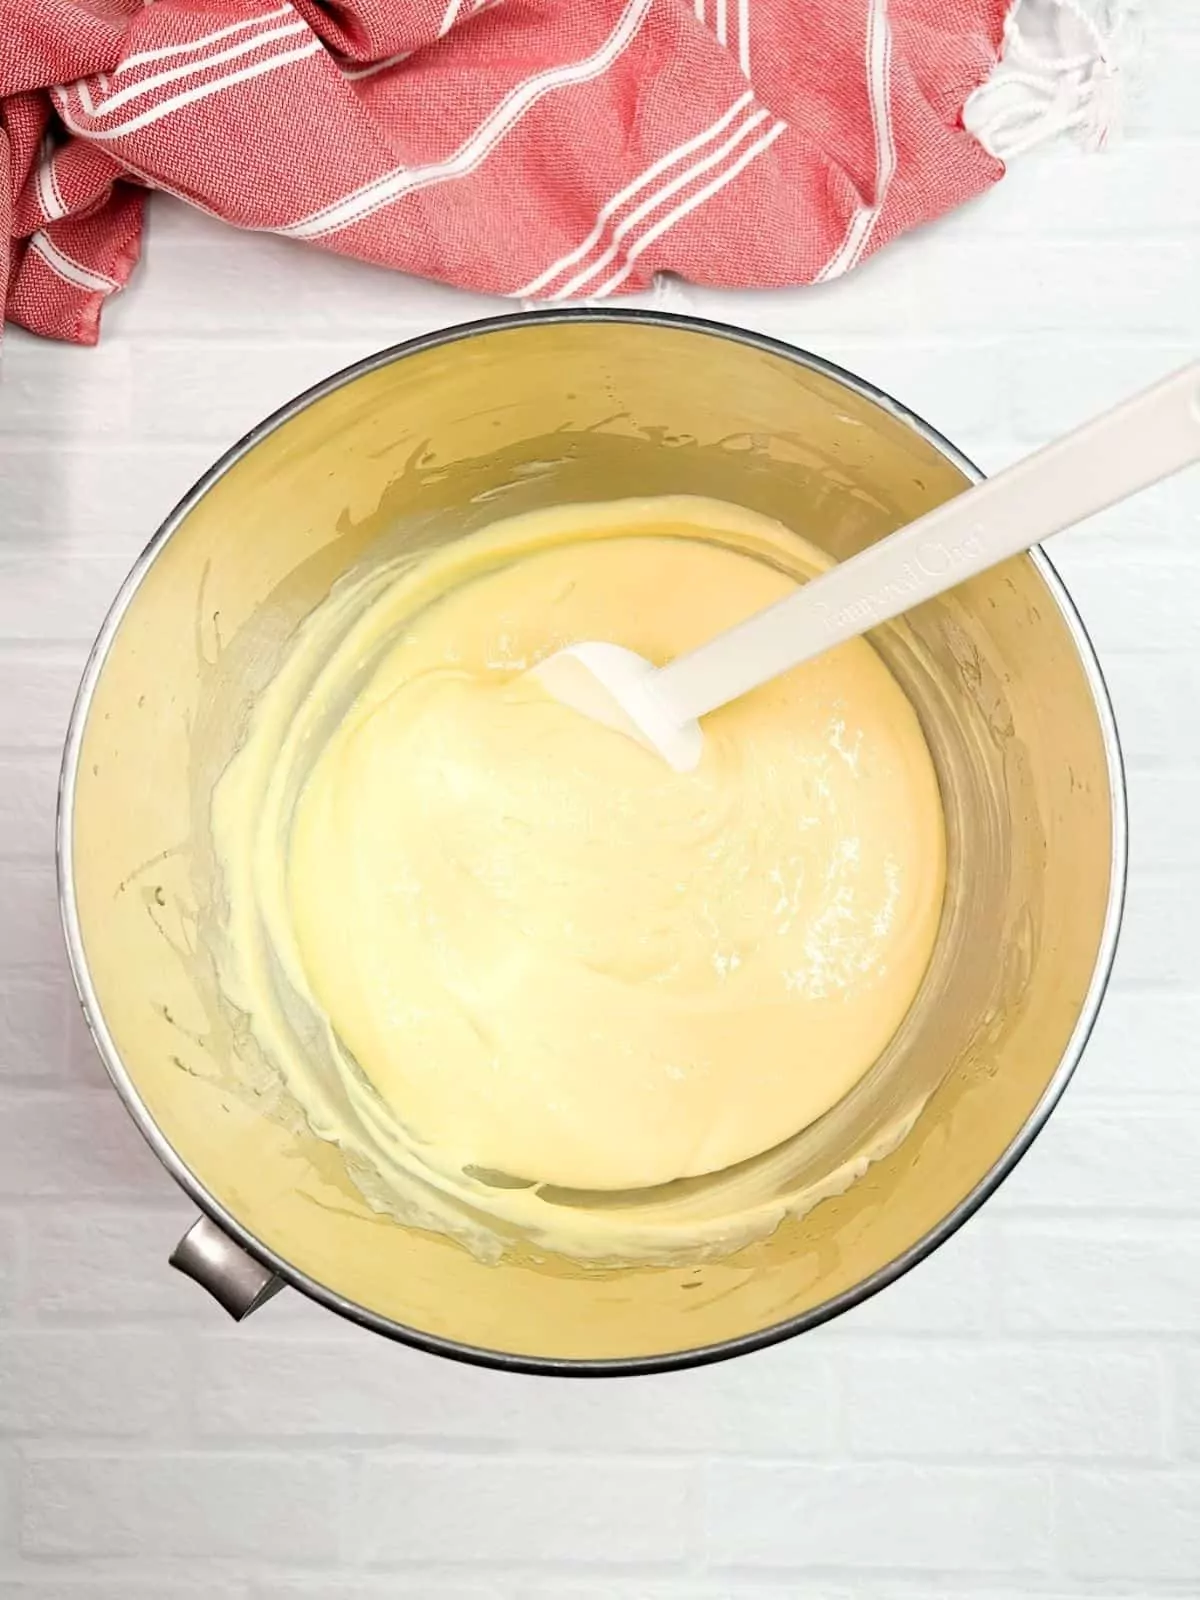 vanilla cake batter in mixing bowl with rubber spatula.